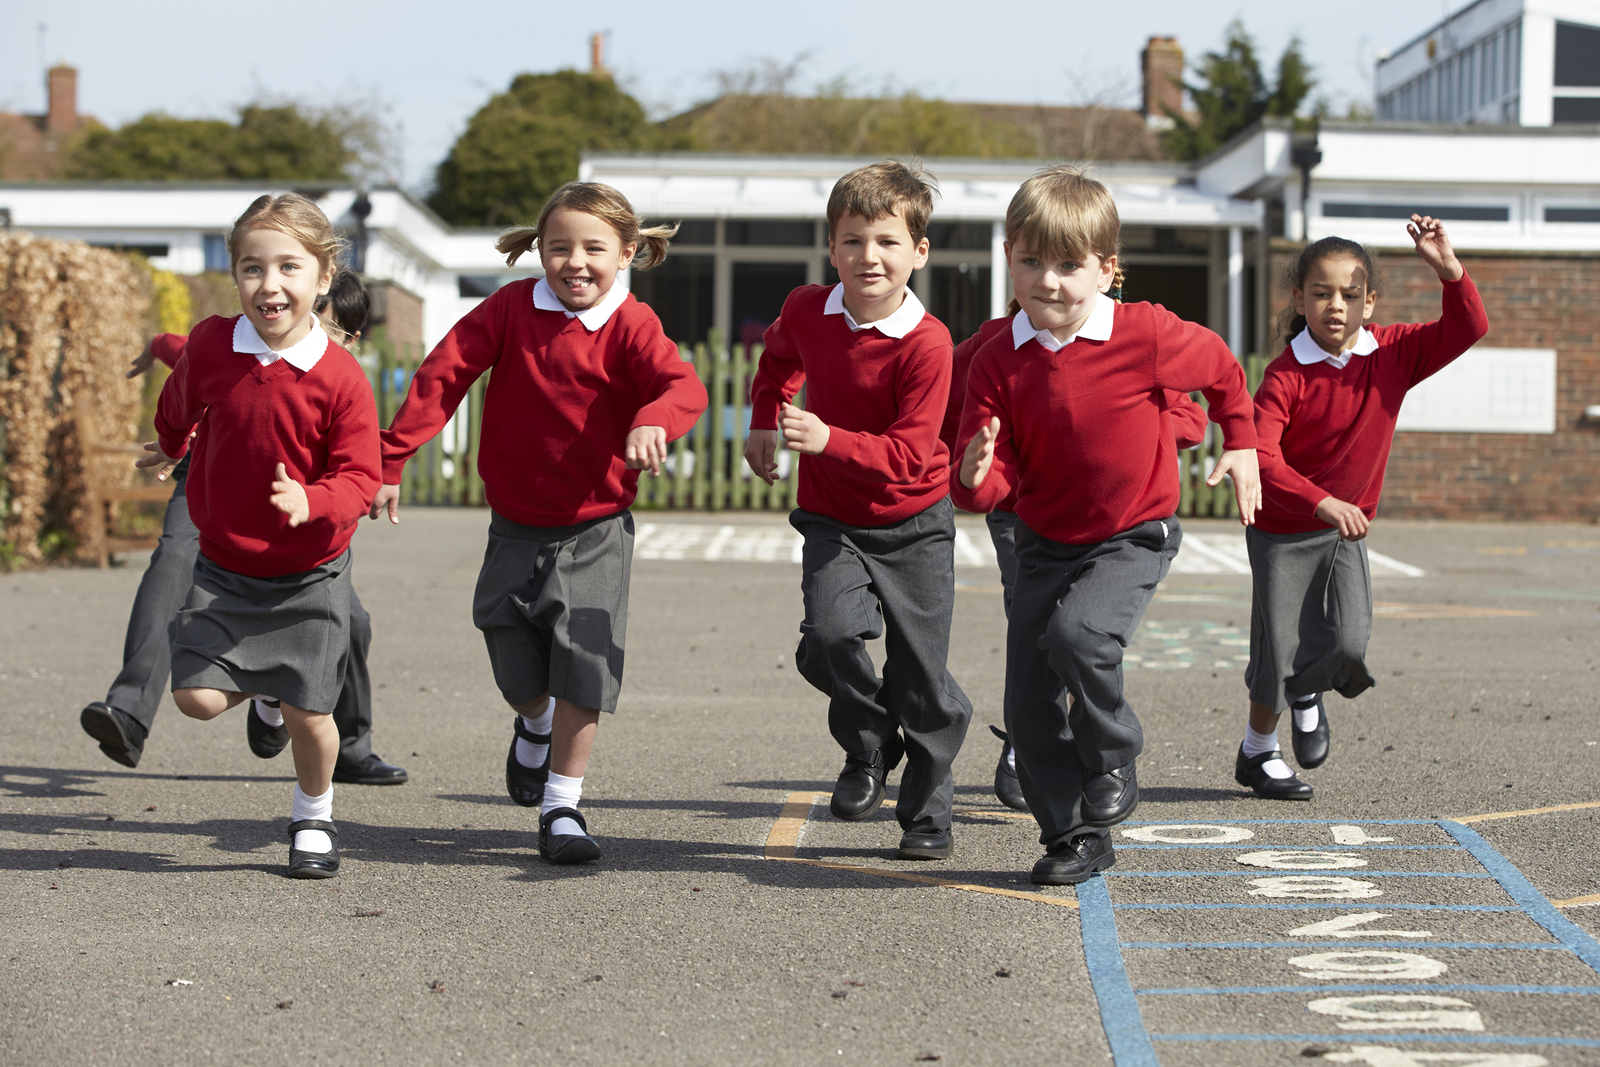 7 ways to mark your child's first day at school TheSchoolRun